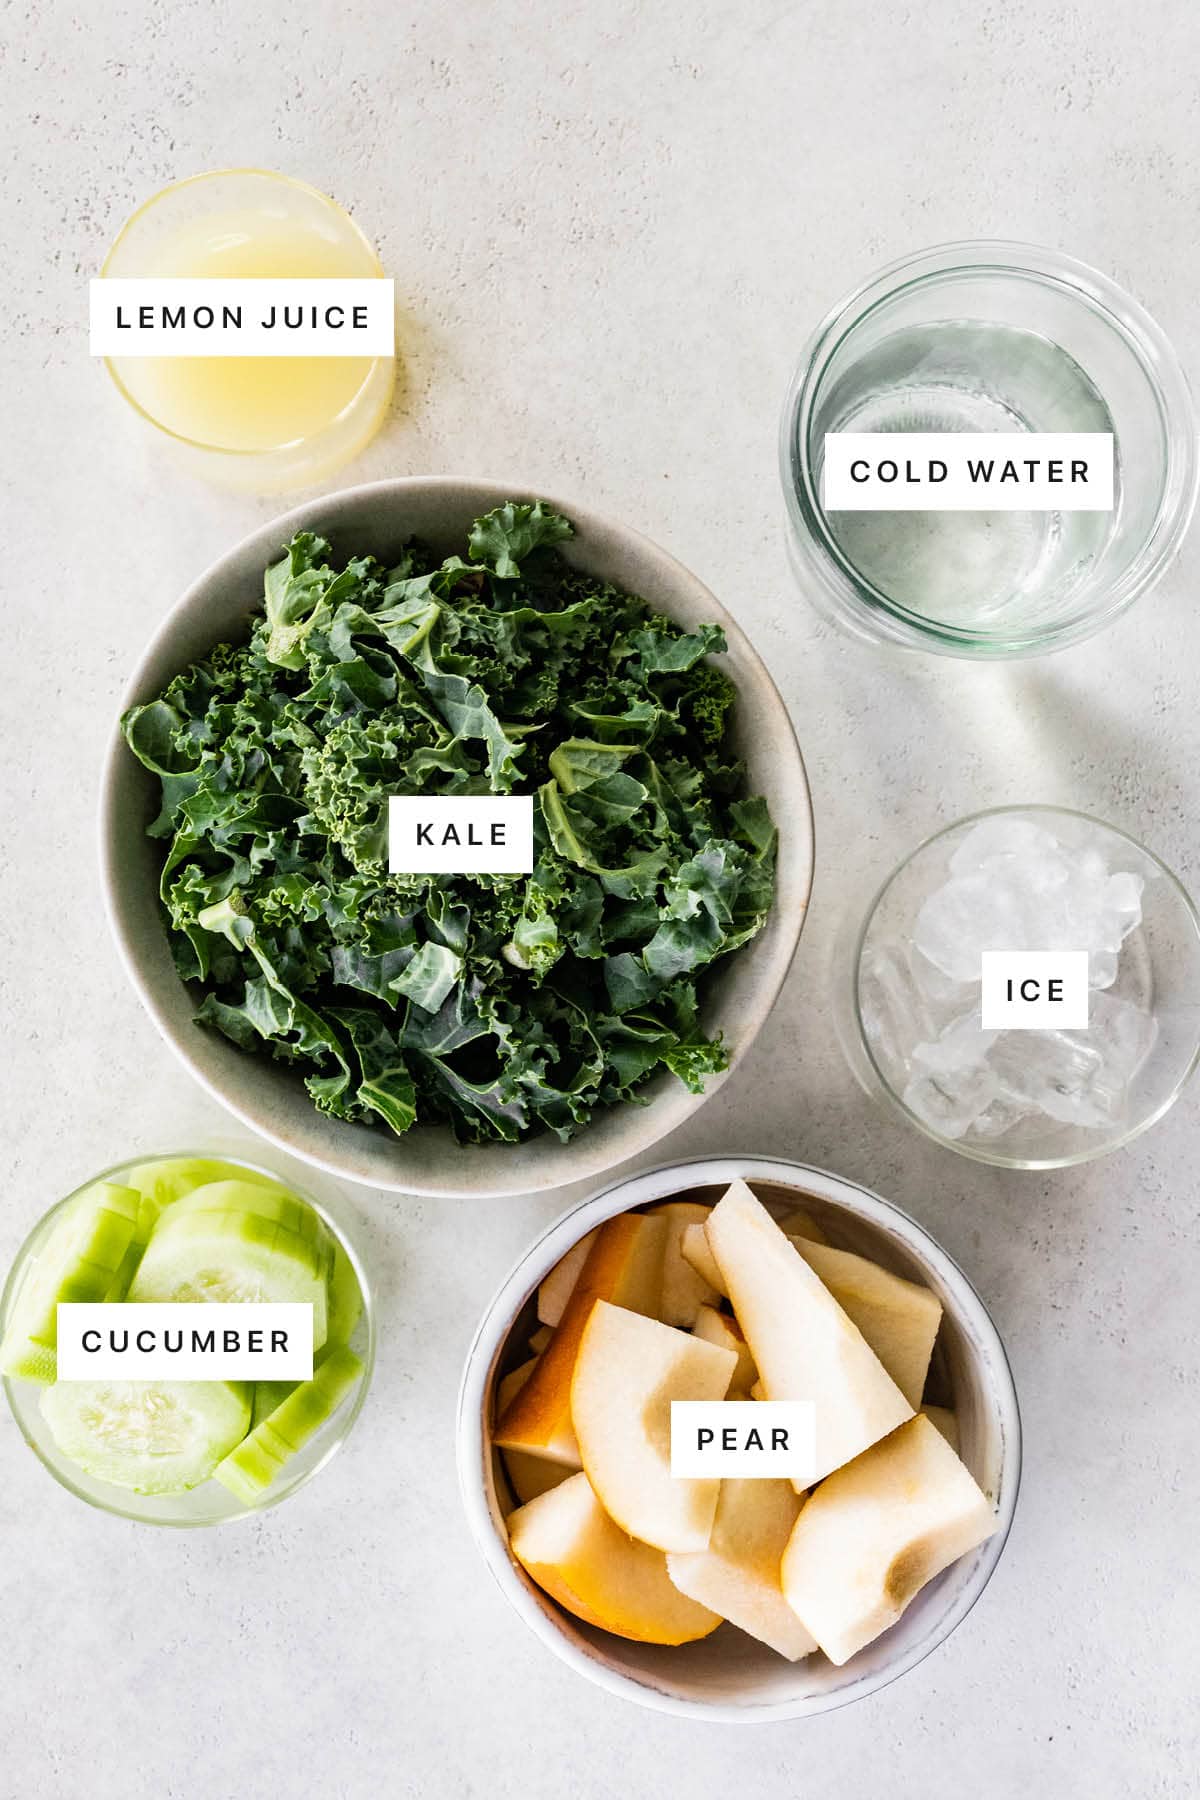 Measured ingredients to make a green lemonade smoothie: lemon juice, cold water, kale, ice, cucumber and pear.